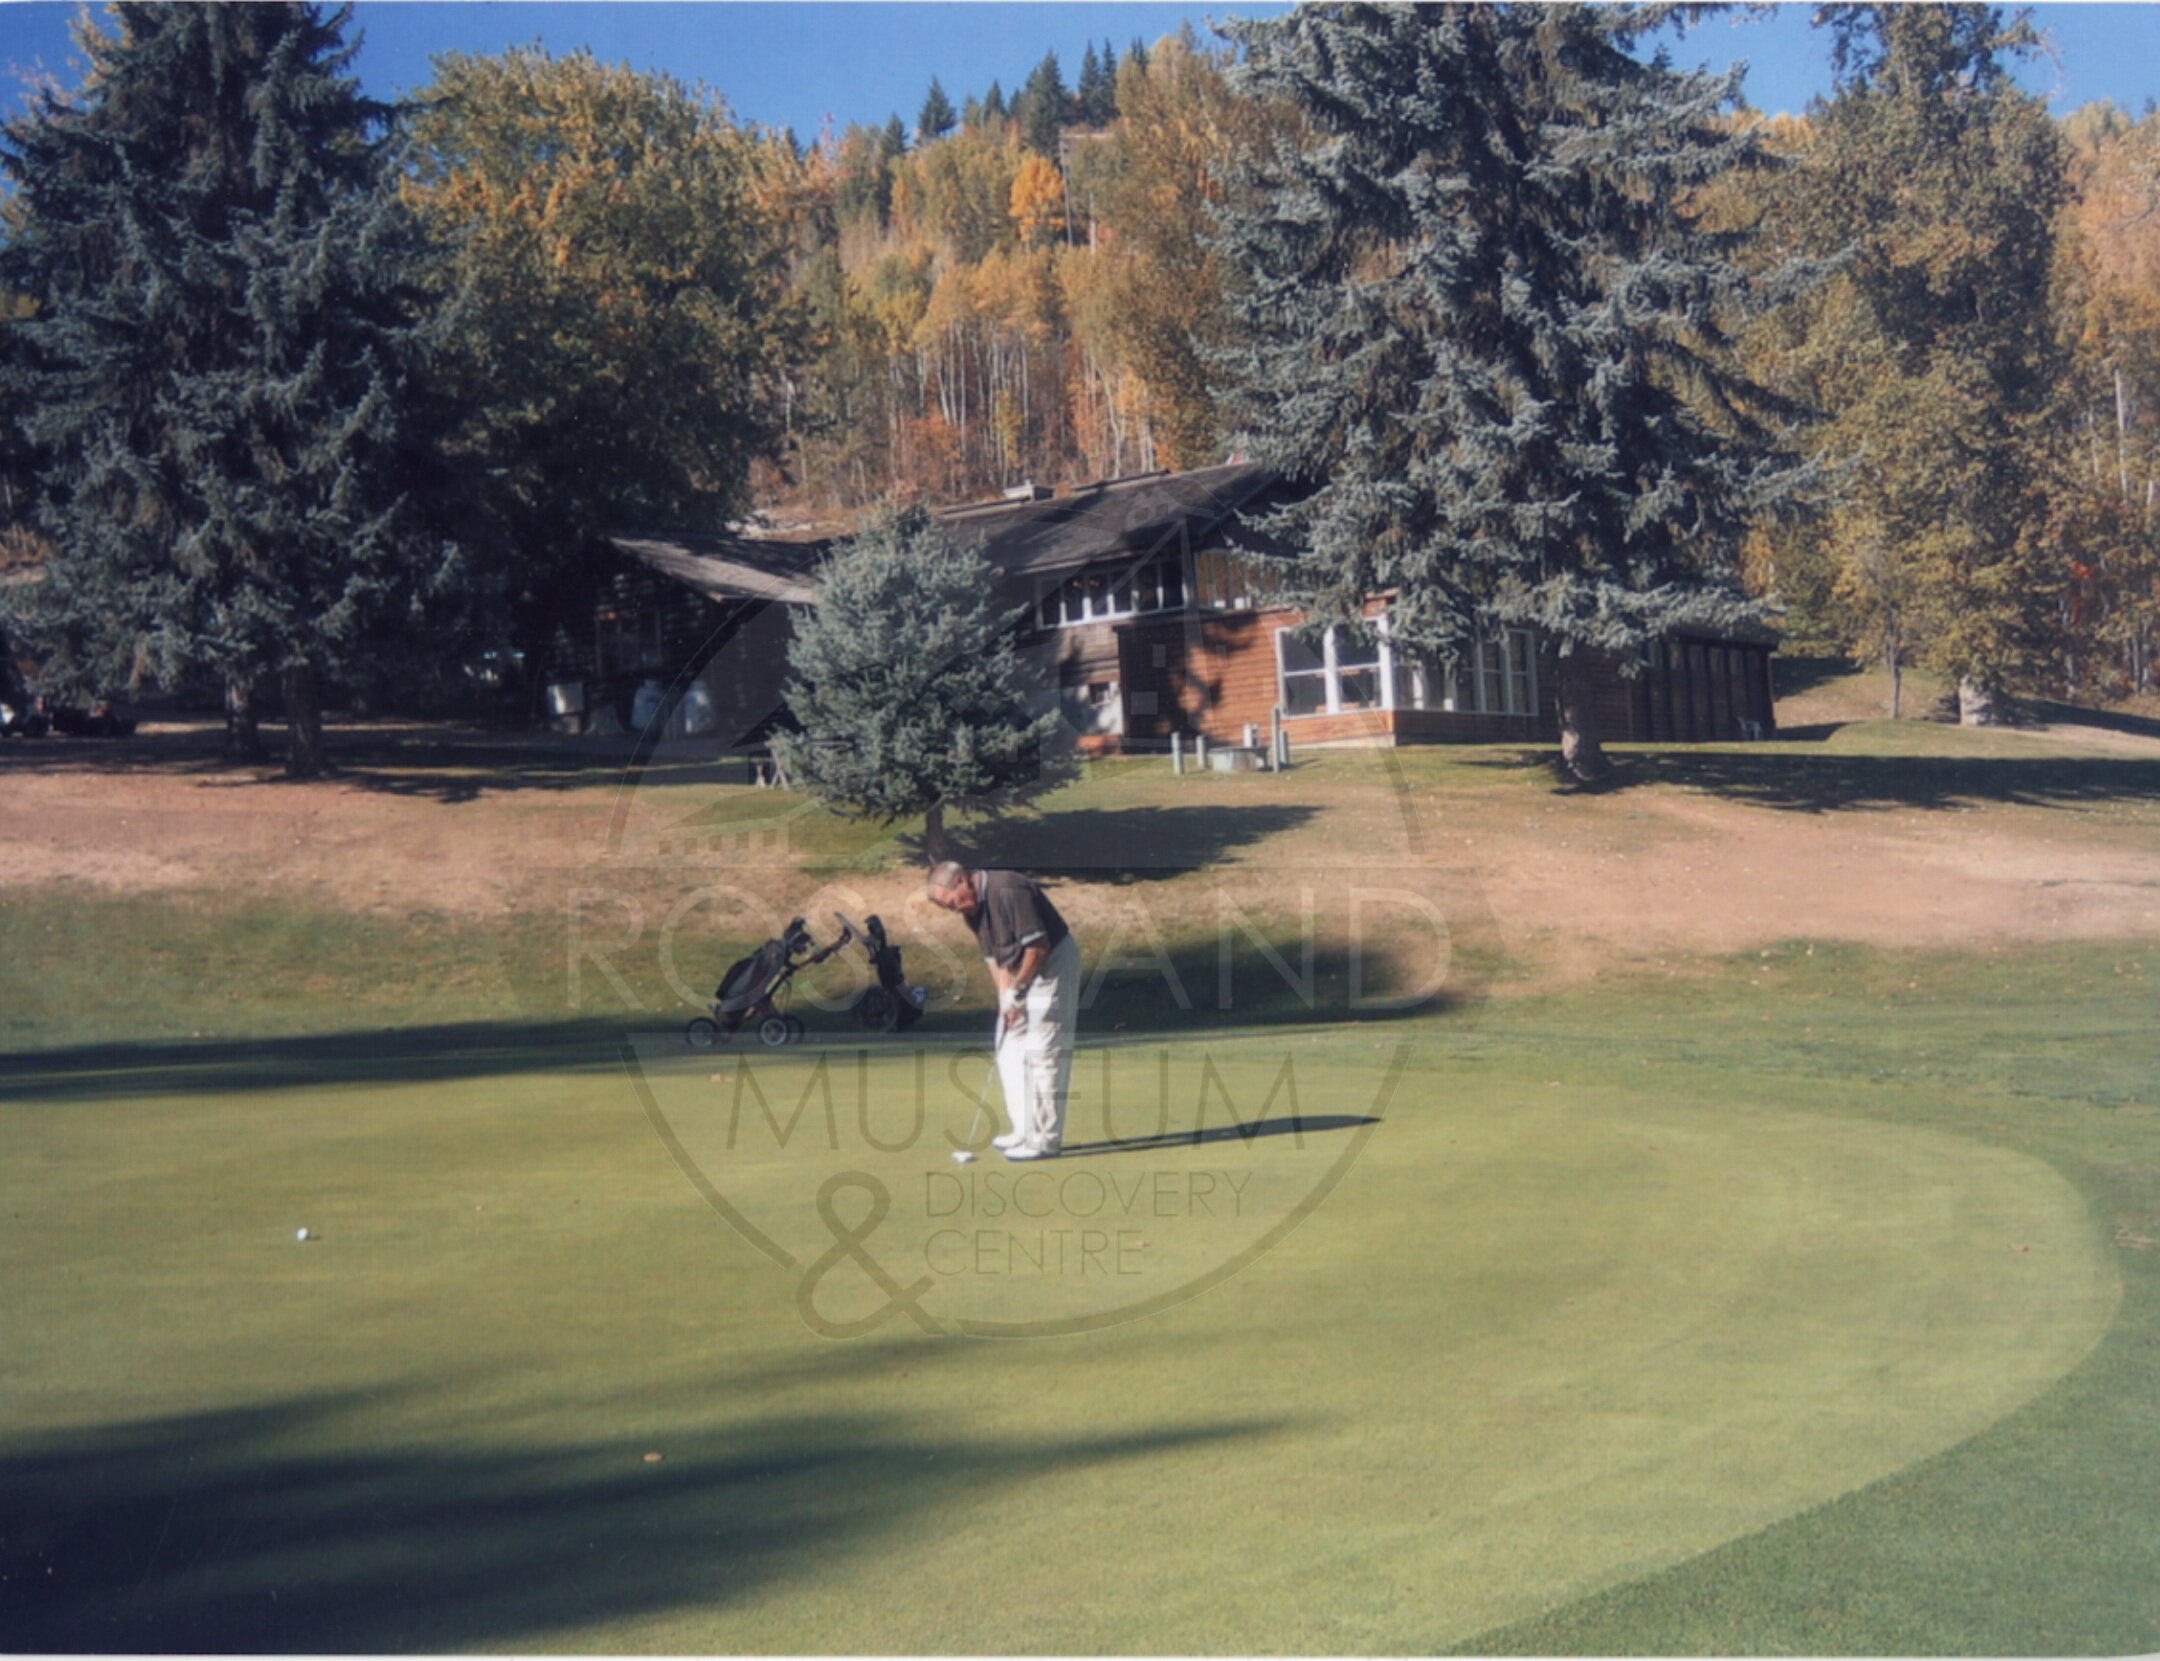 Libby Martin's Collection - Rossland Golf Course, 1996